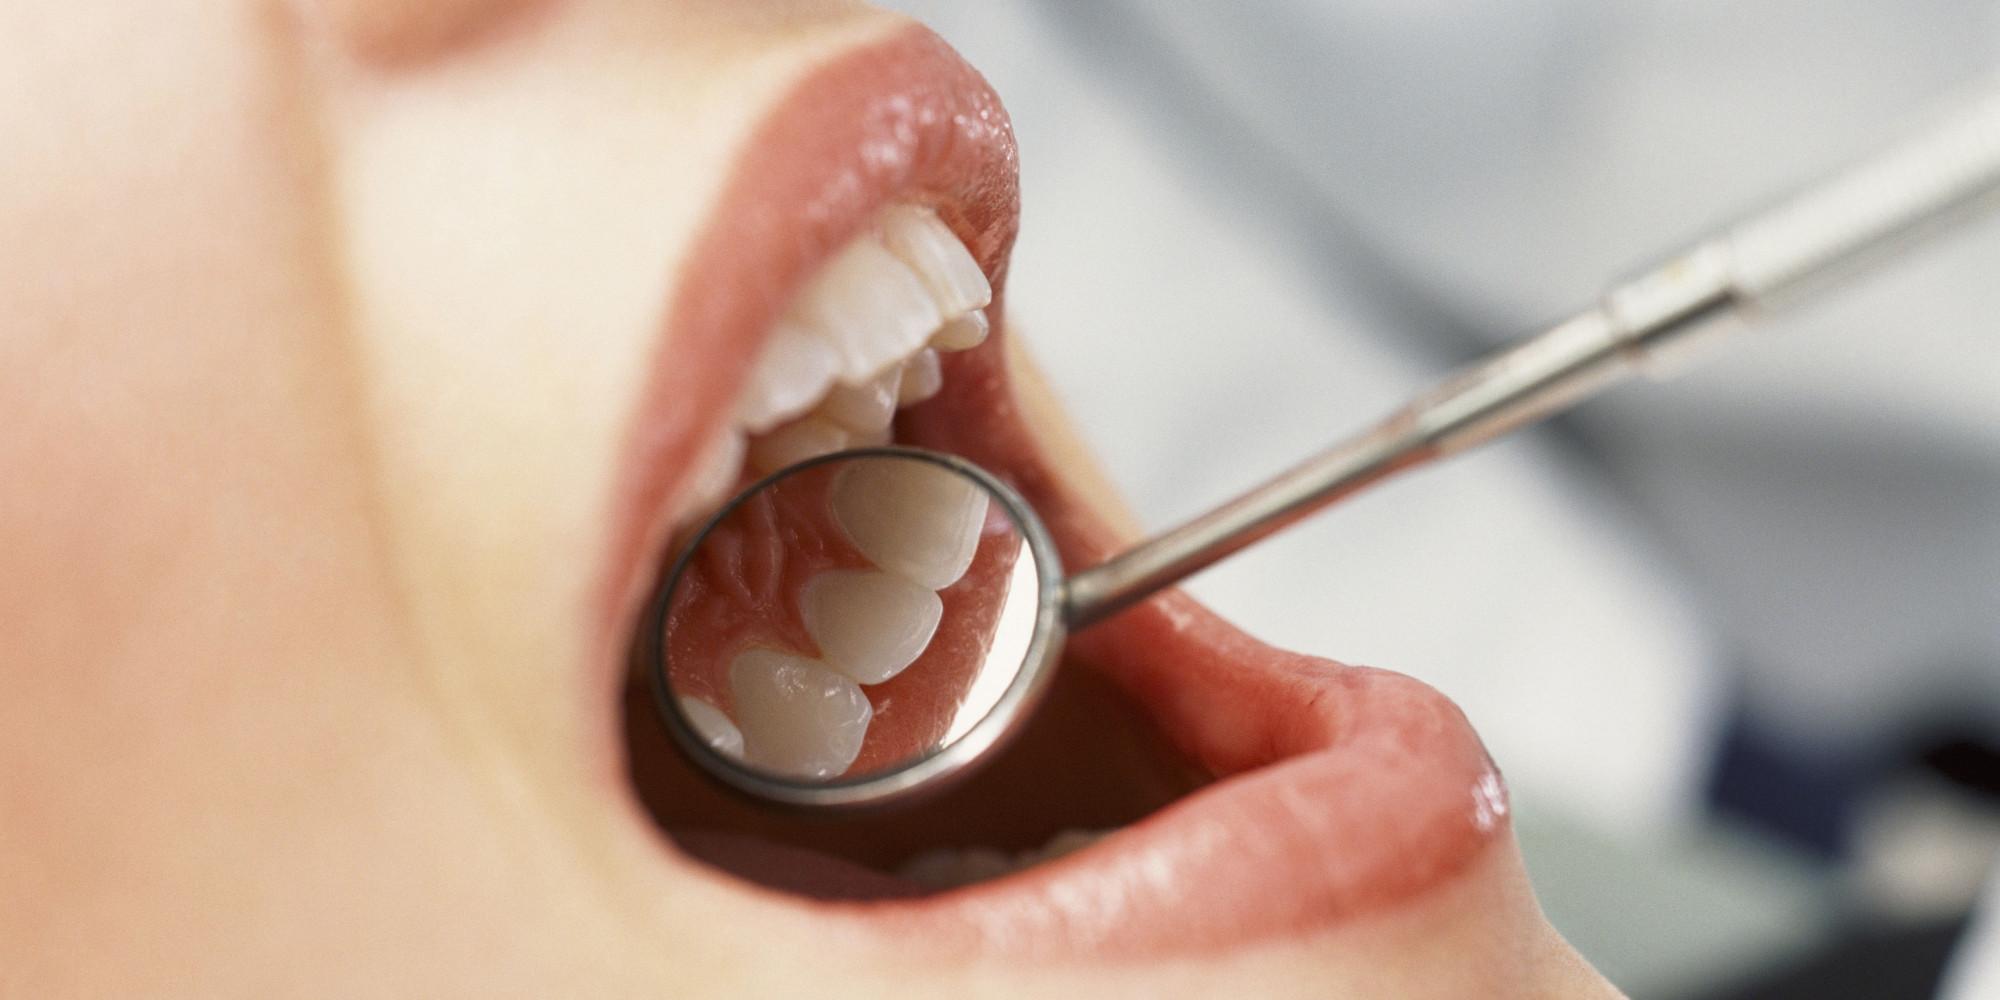 A Dentist's View on Tackling the National Dental Health Crisis | HuffPost